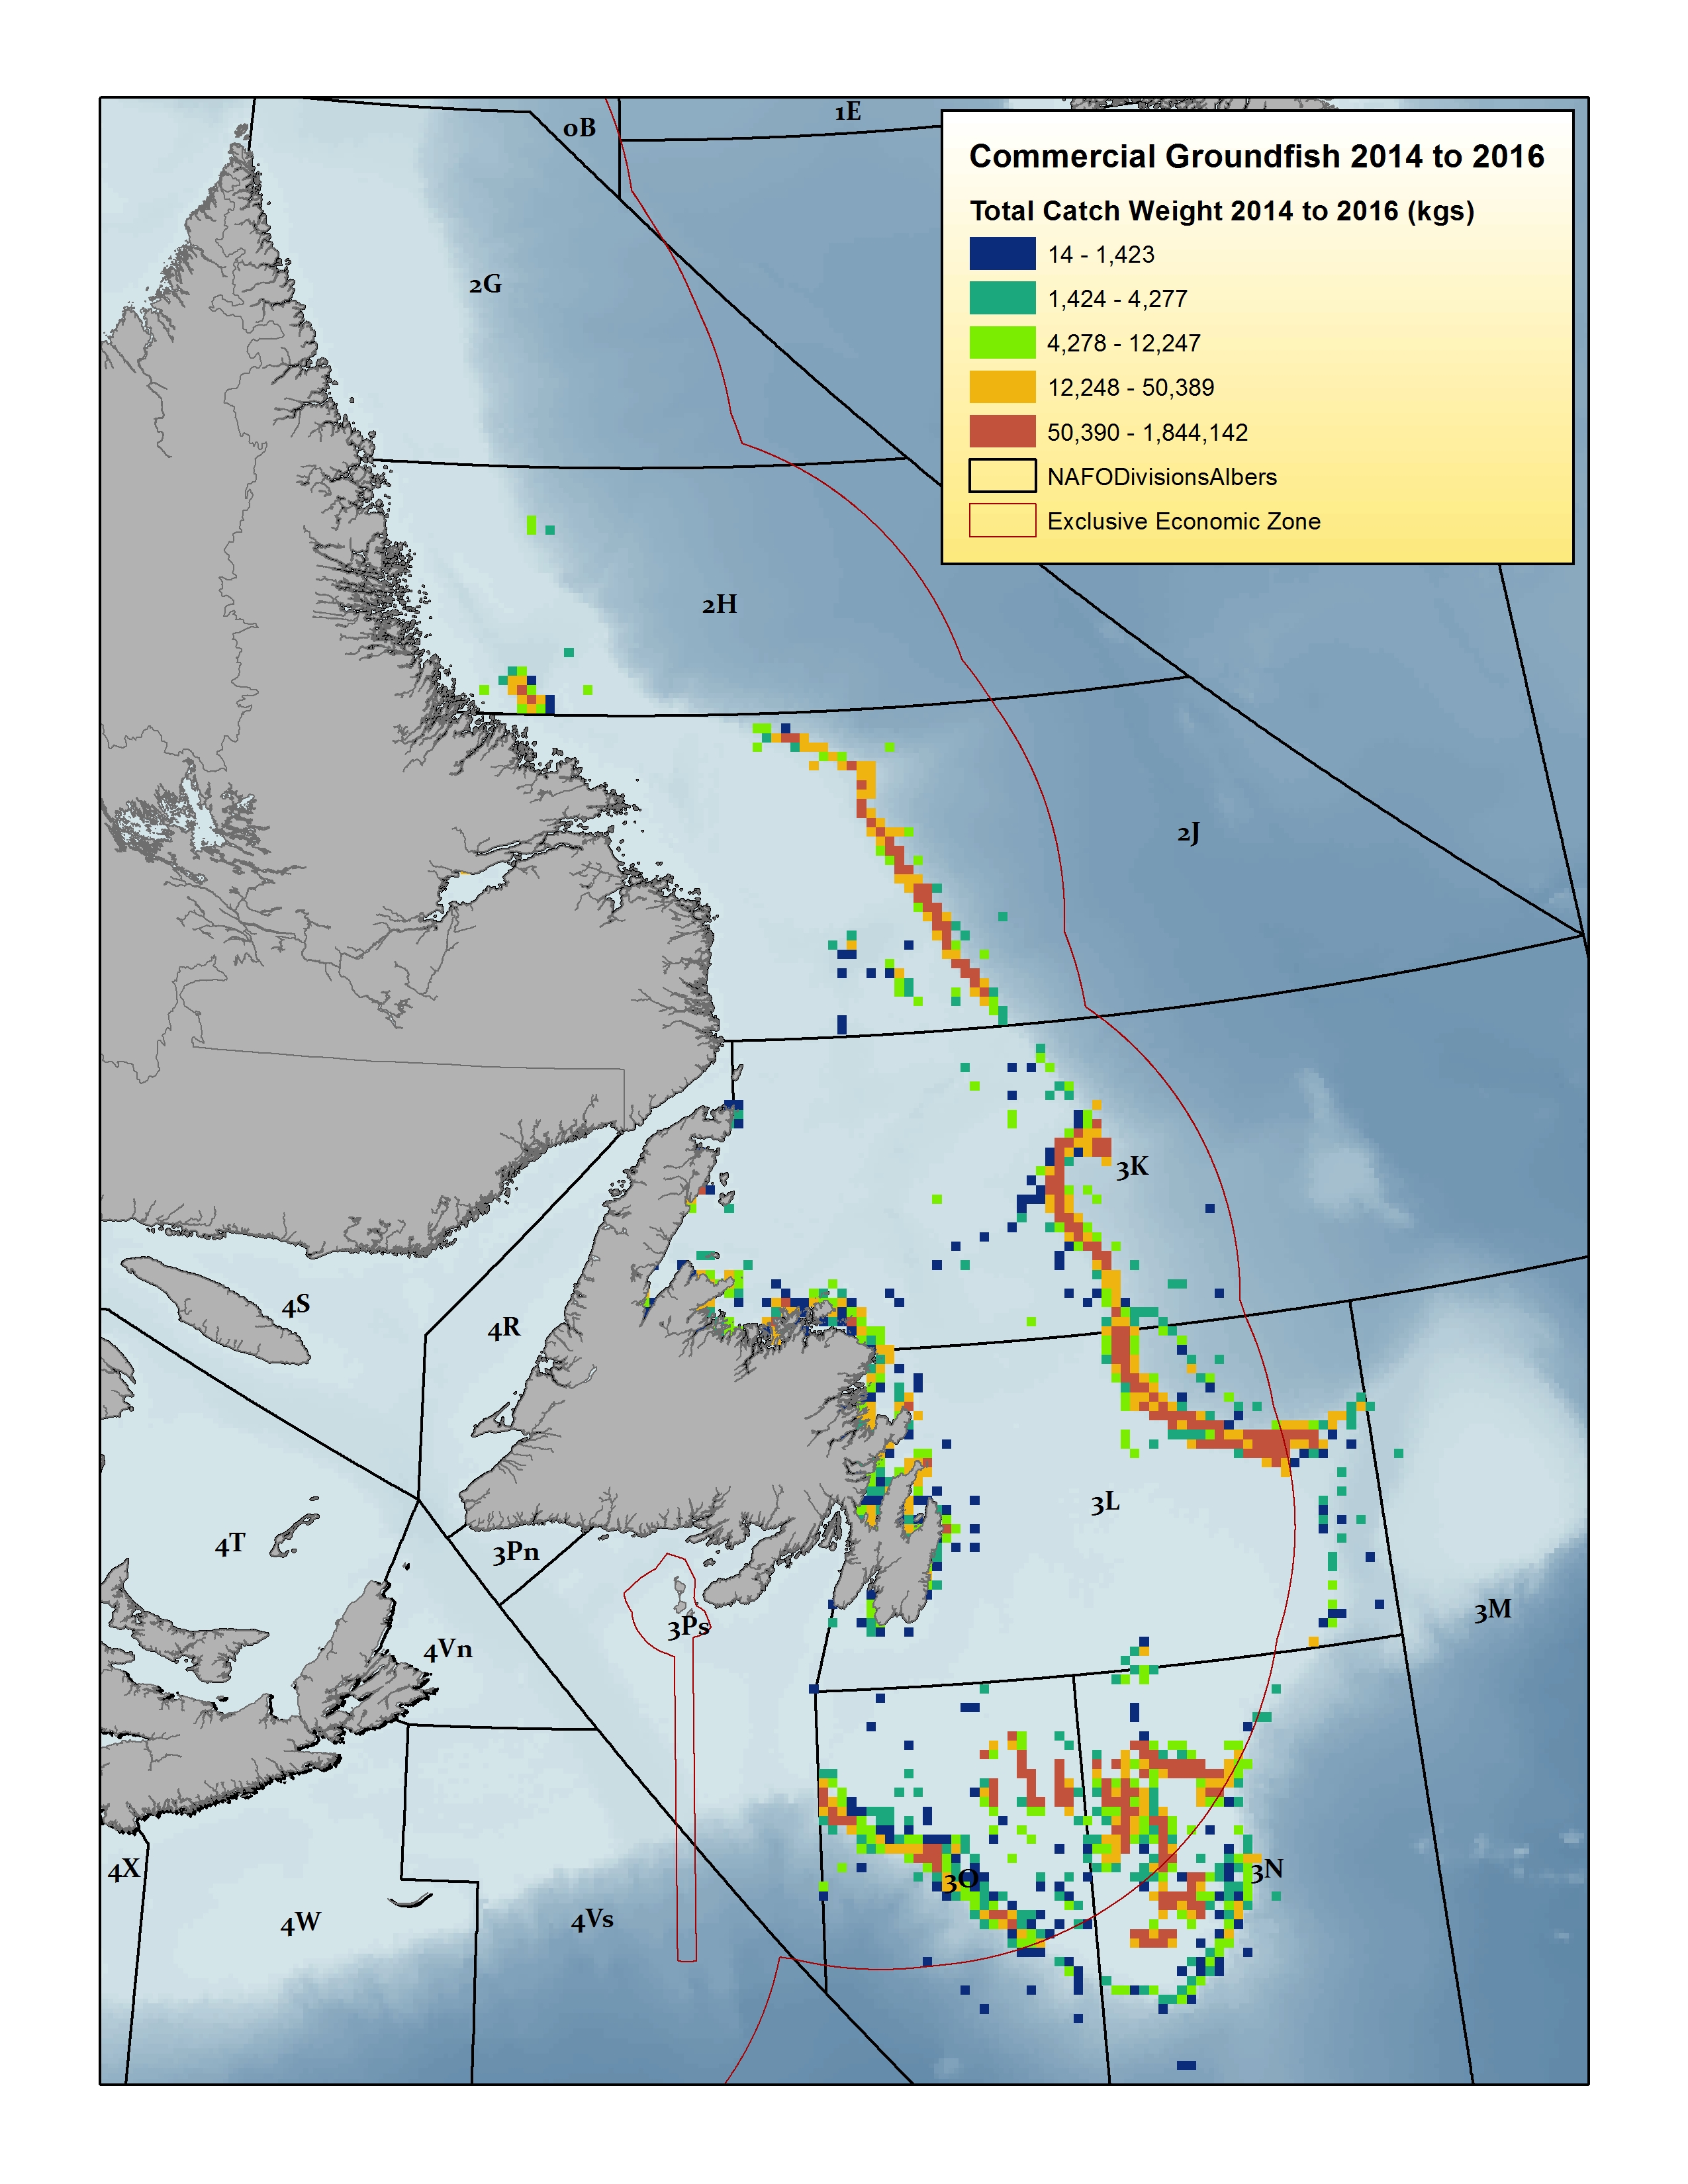 Map illustrating distribution of catch weight of groundfish in NAFO Subarea 2 and Divisions 3KLMNO for 2014 to 2016 period.